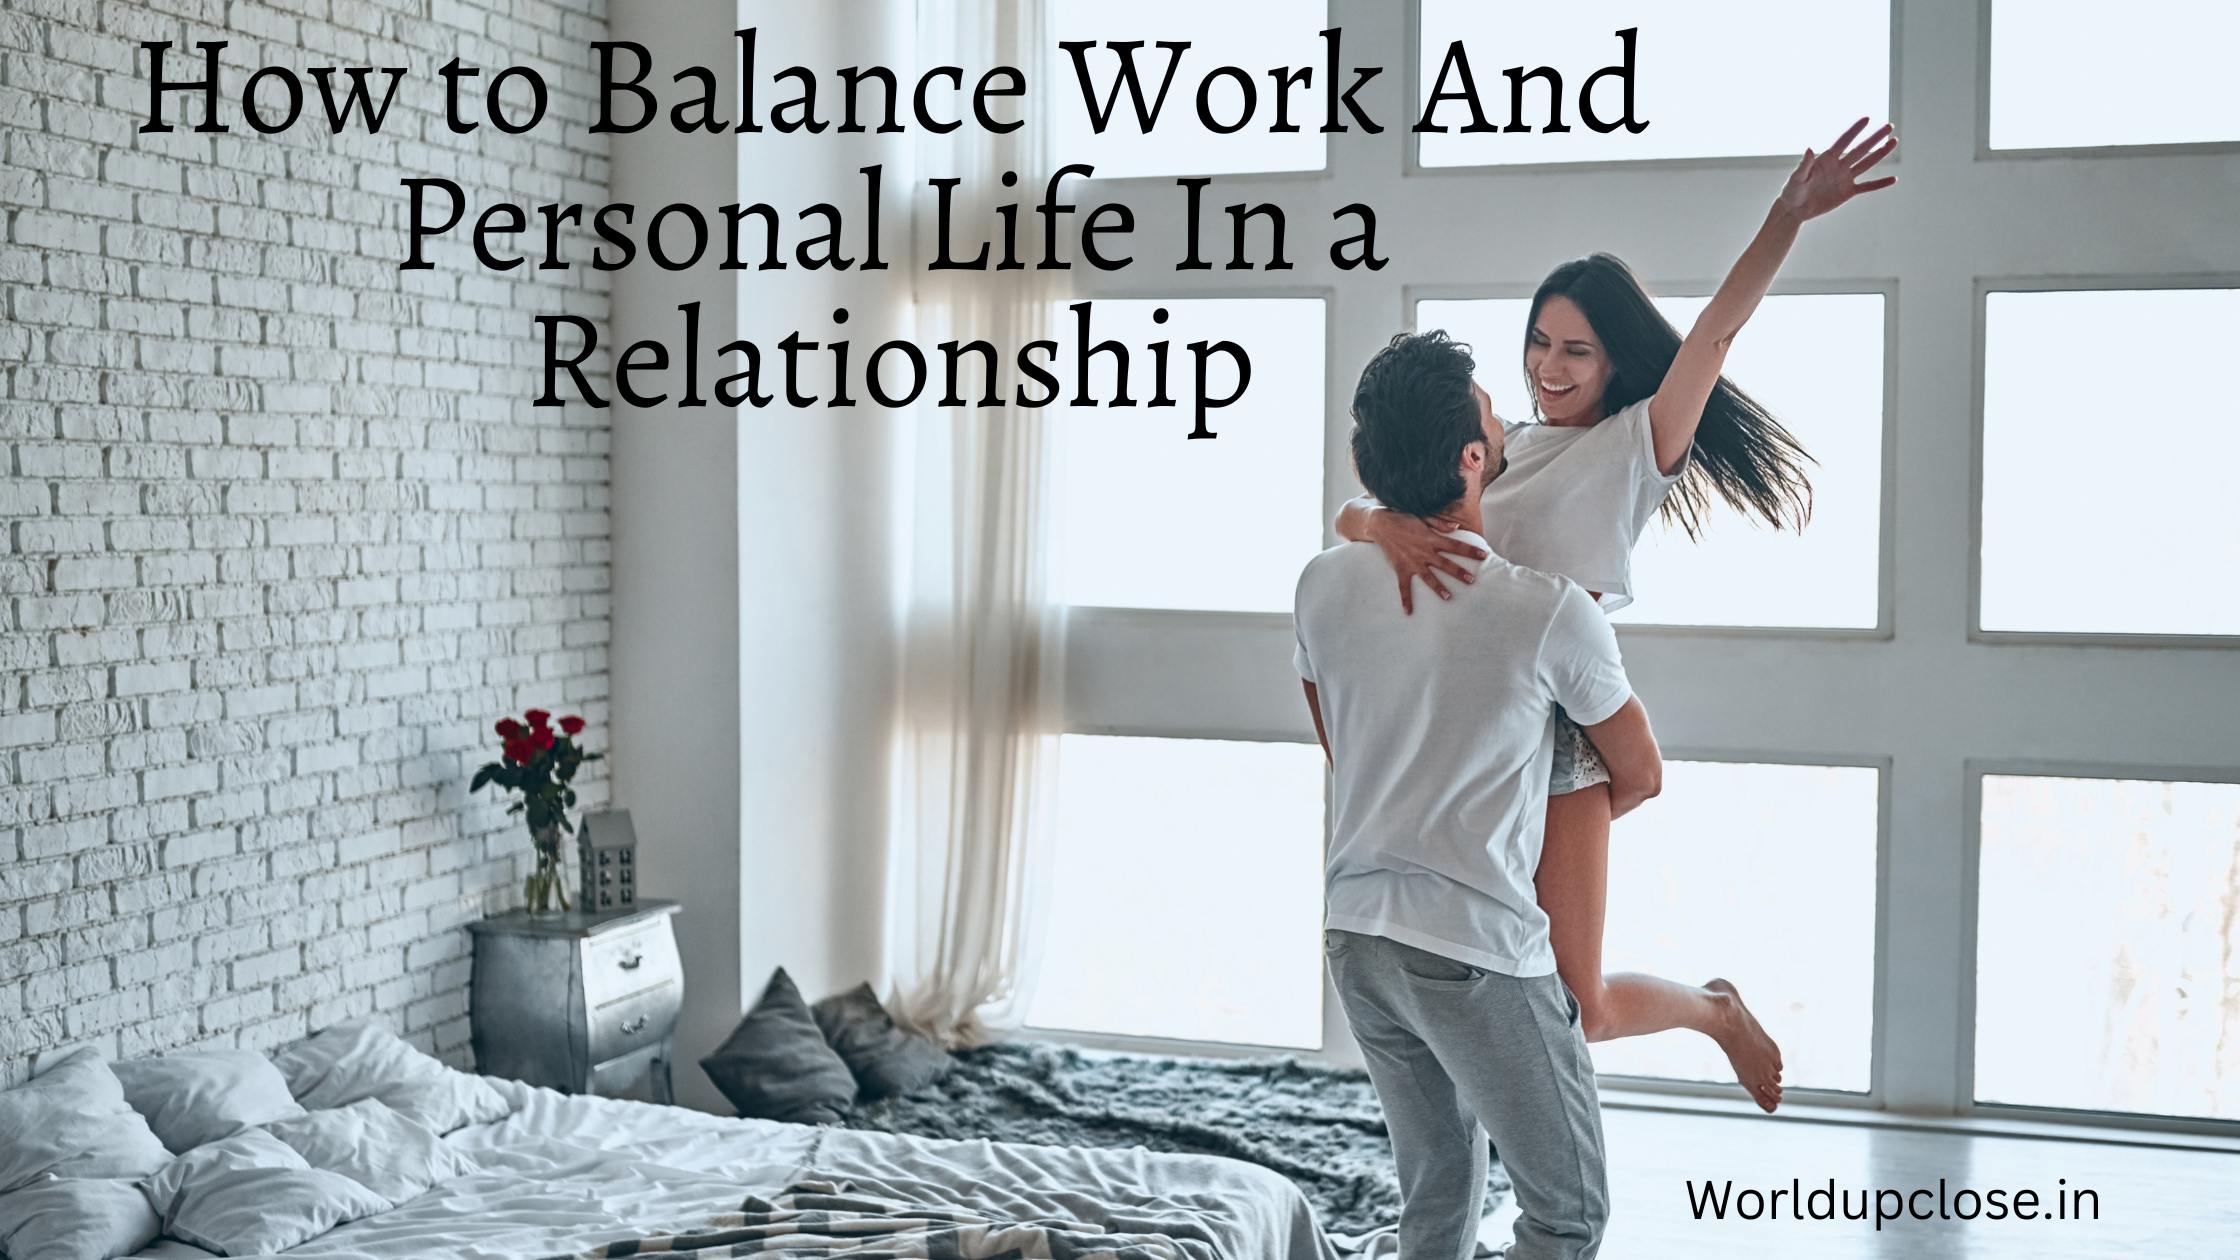 11 Ways to Balance Work and Personal Life in a Relationship 54